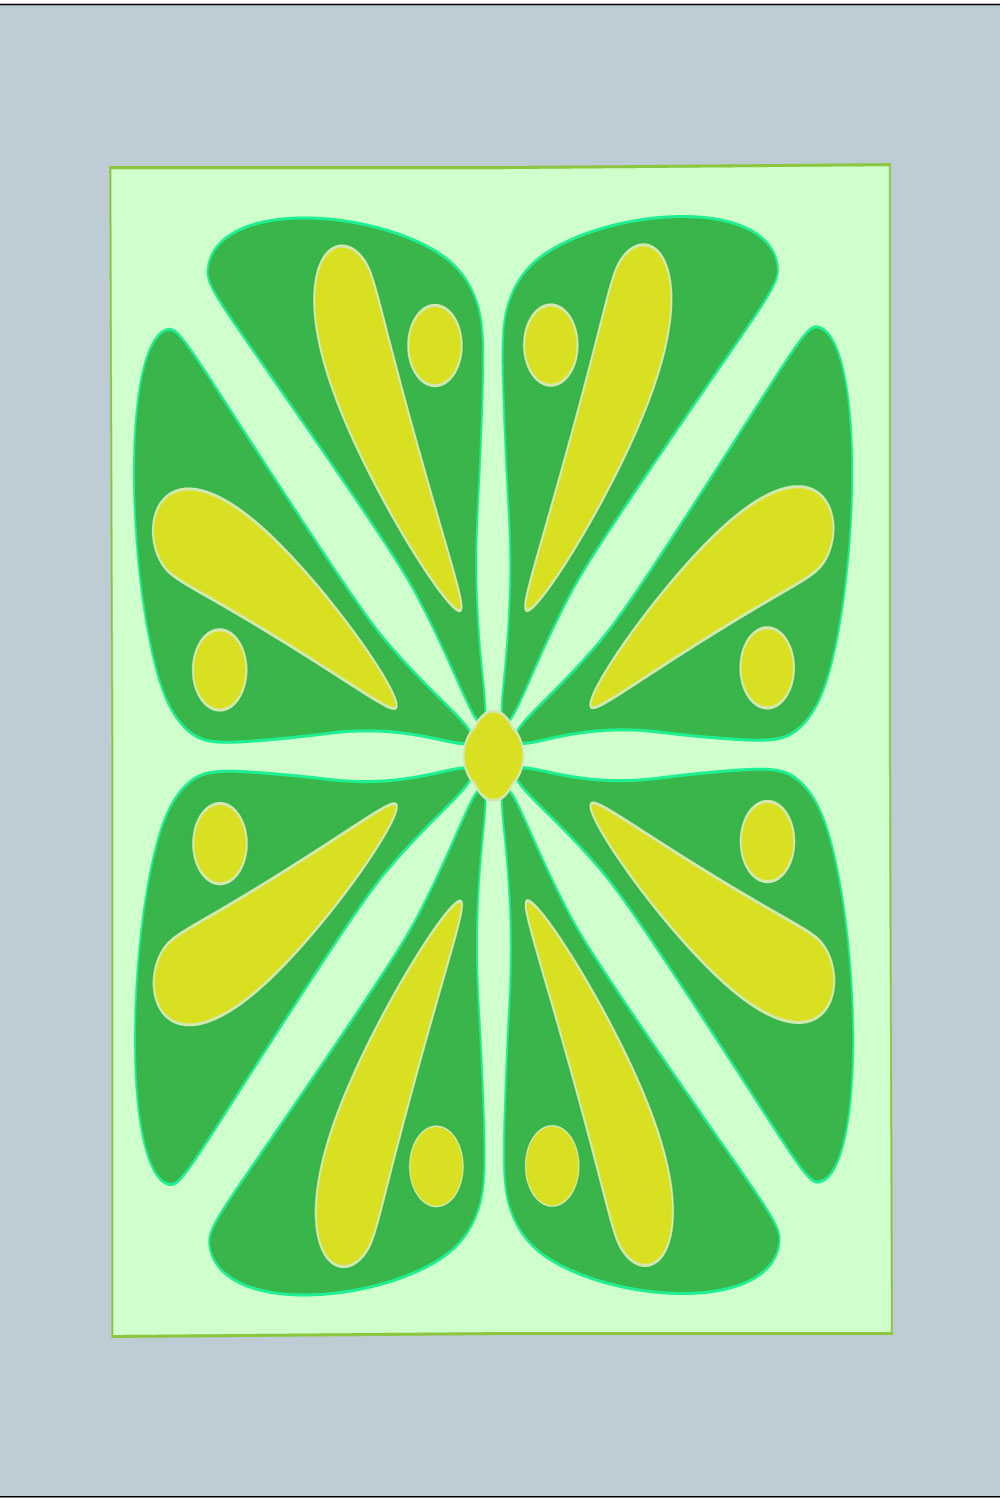 Mandala Art in Light-green-background-with-yellow-and-green-petals pinterest preview image.